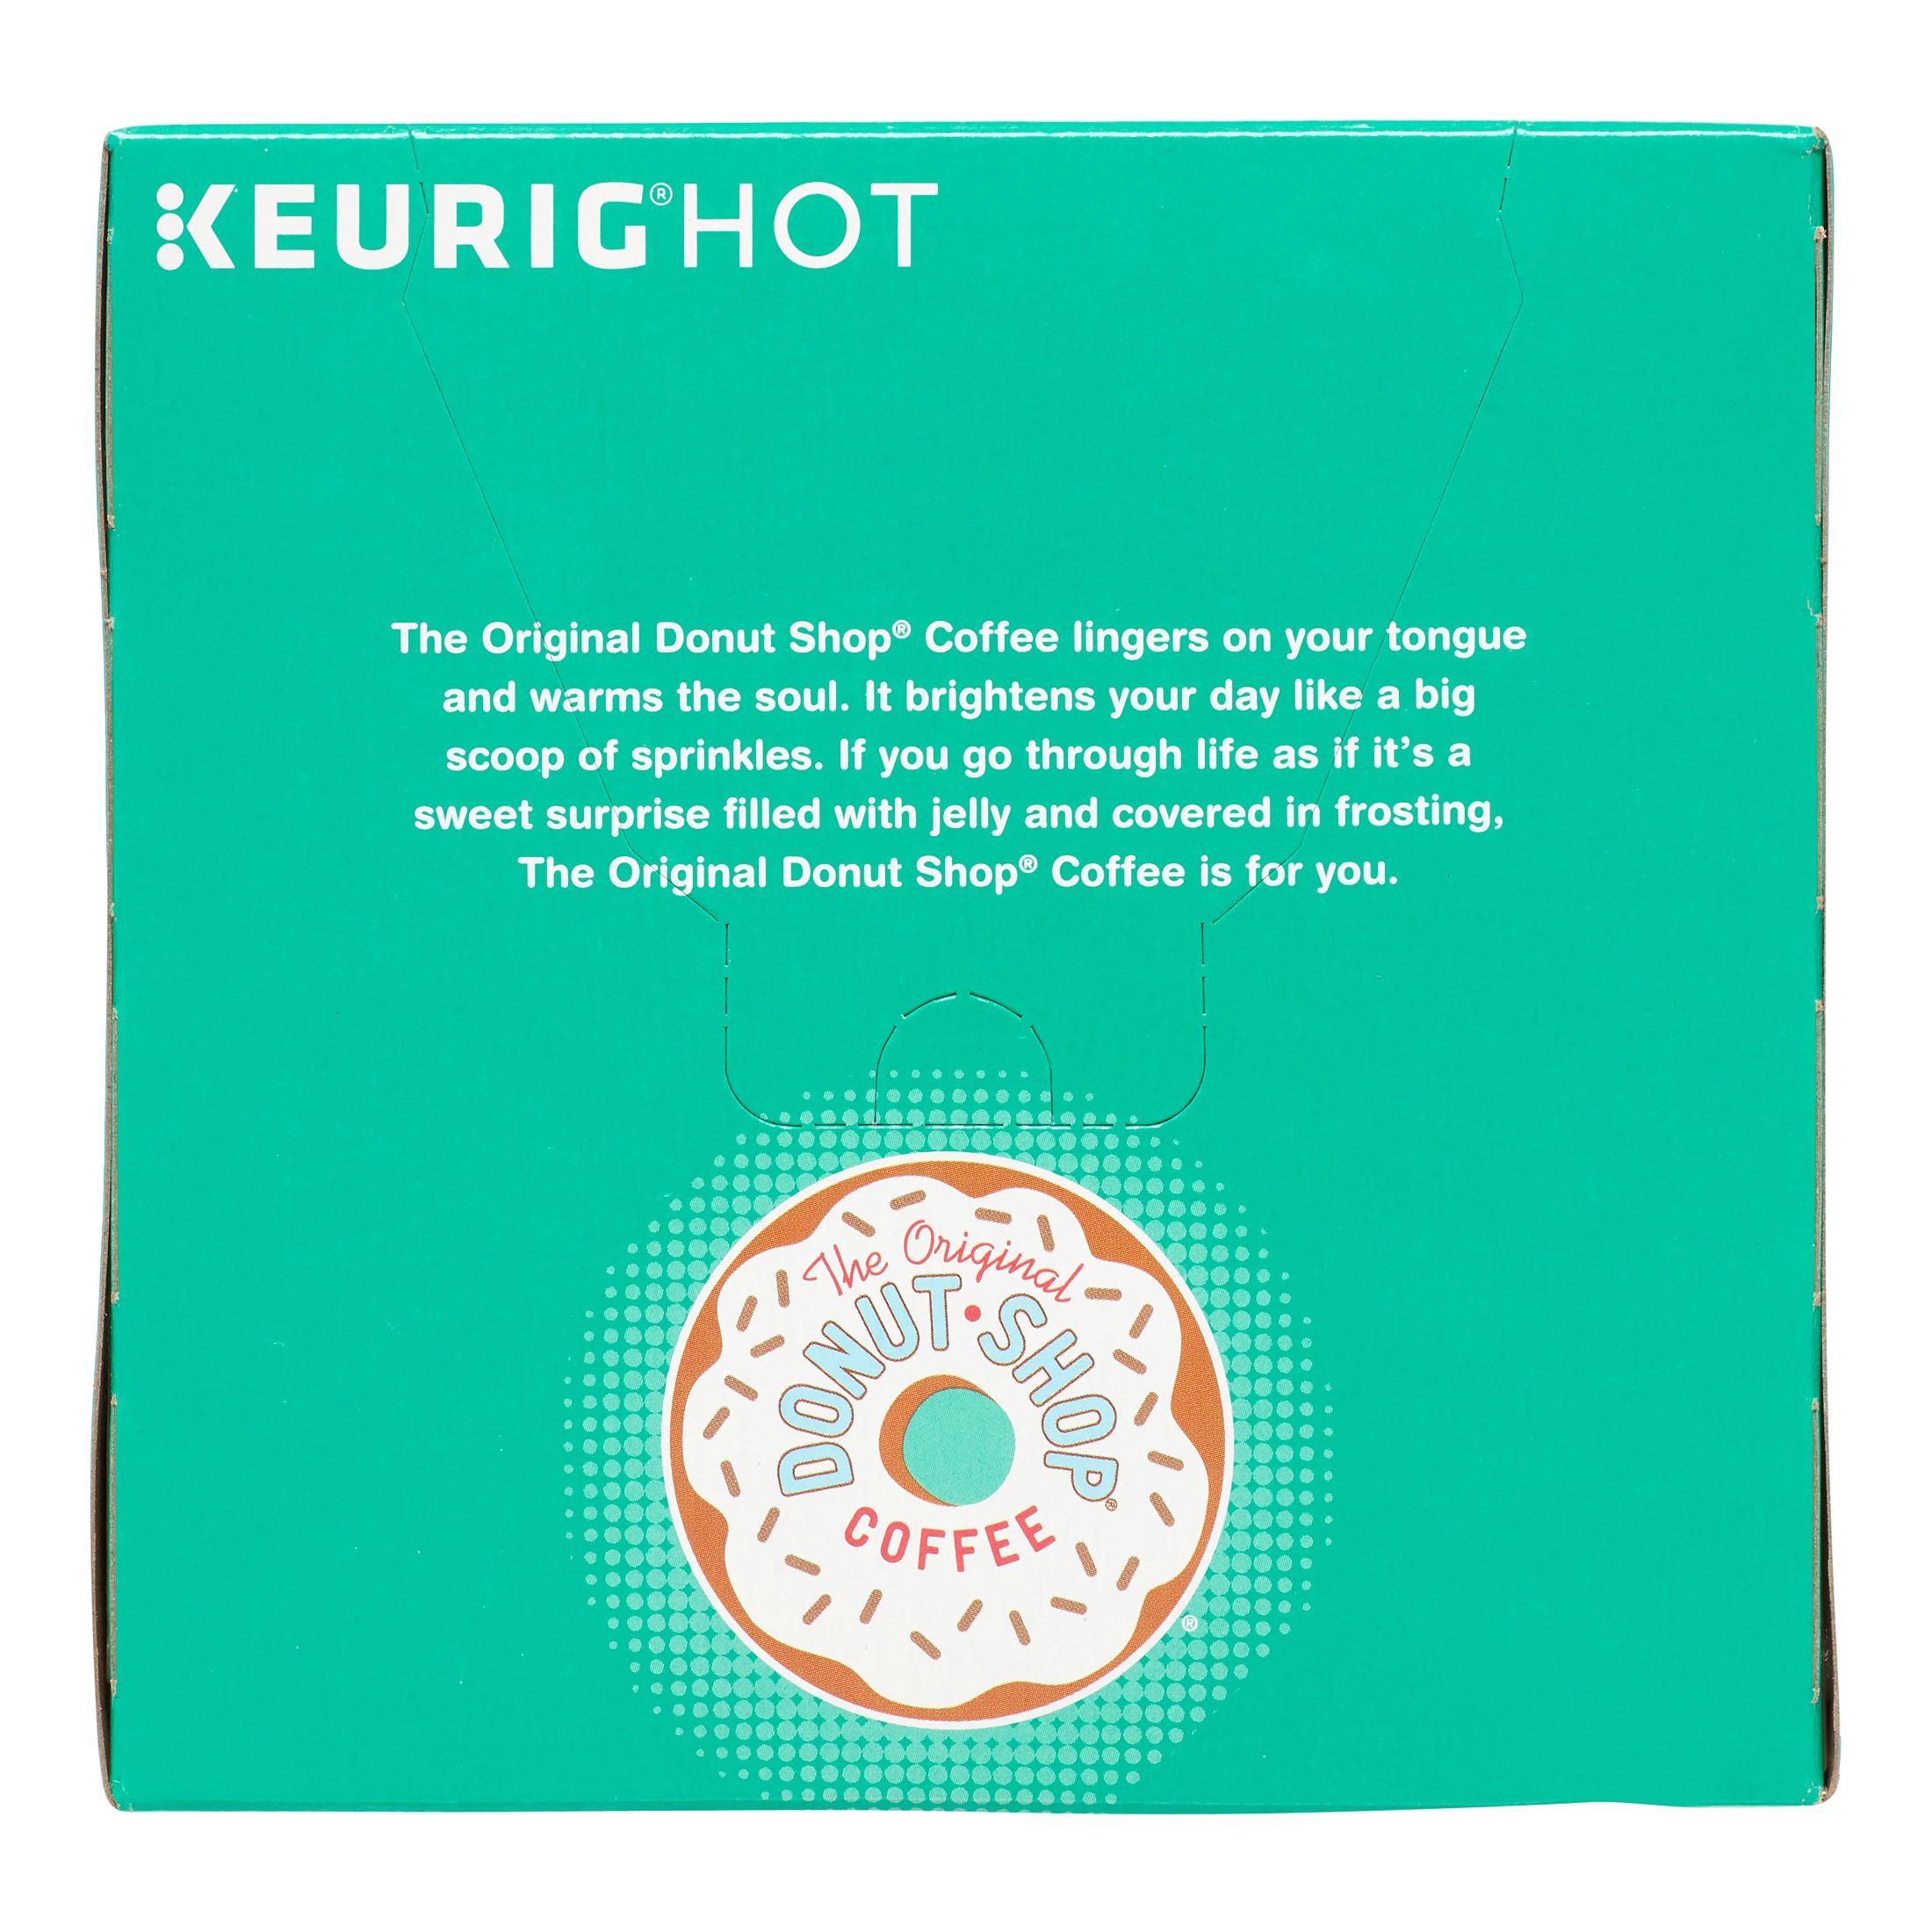 The Original Donut Shop Coconut Mocha Flavored K-Cup Coffee Pods, Medium Roast, 18 Count for Keurig Brewers - image 3 of 10